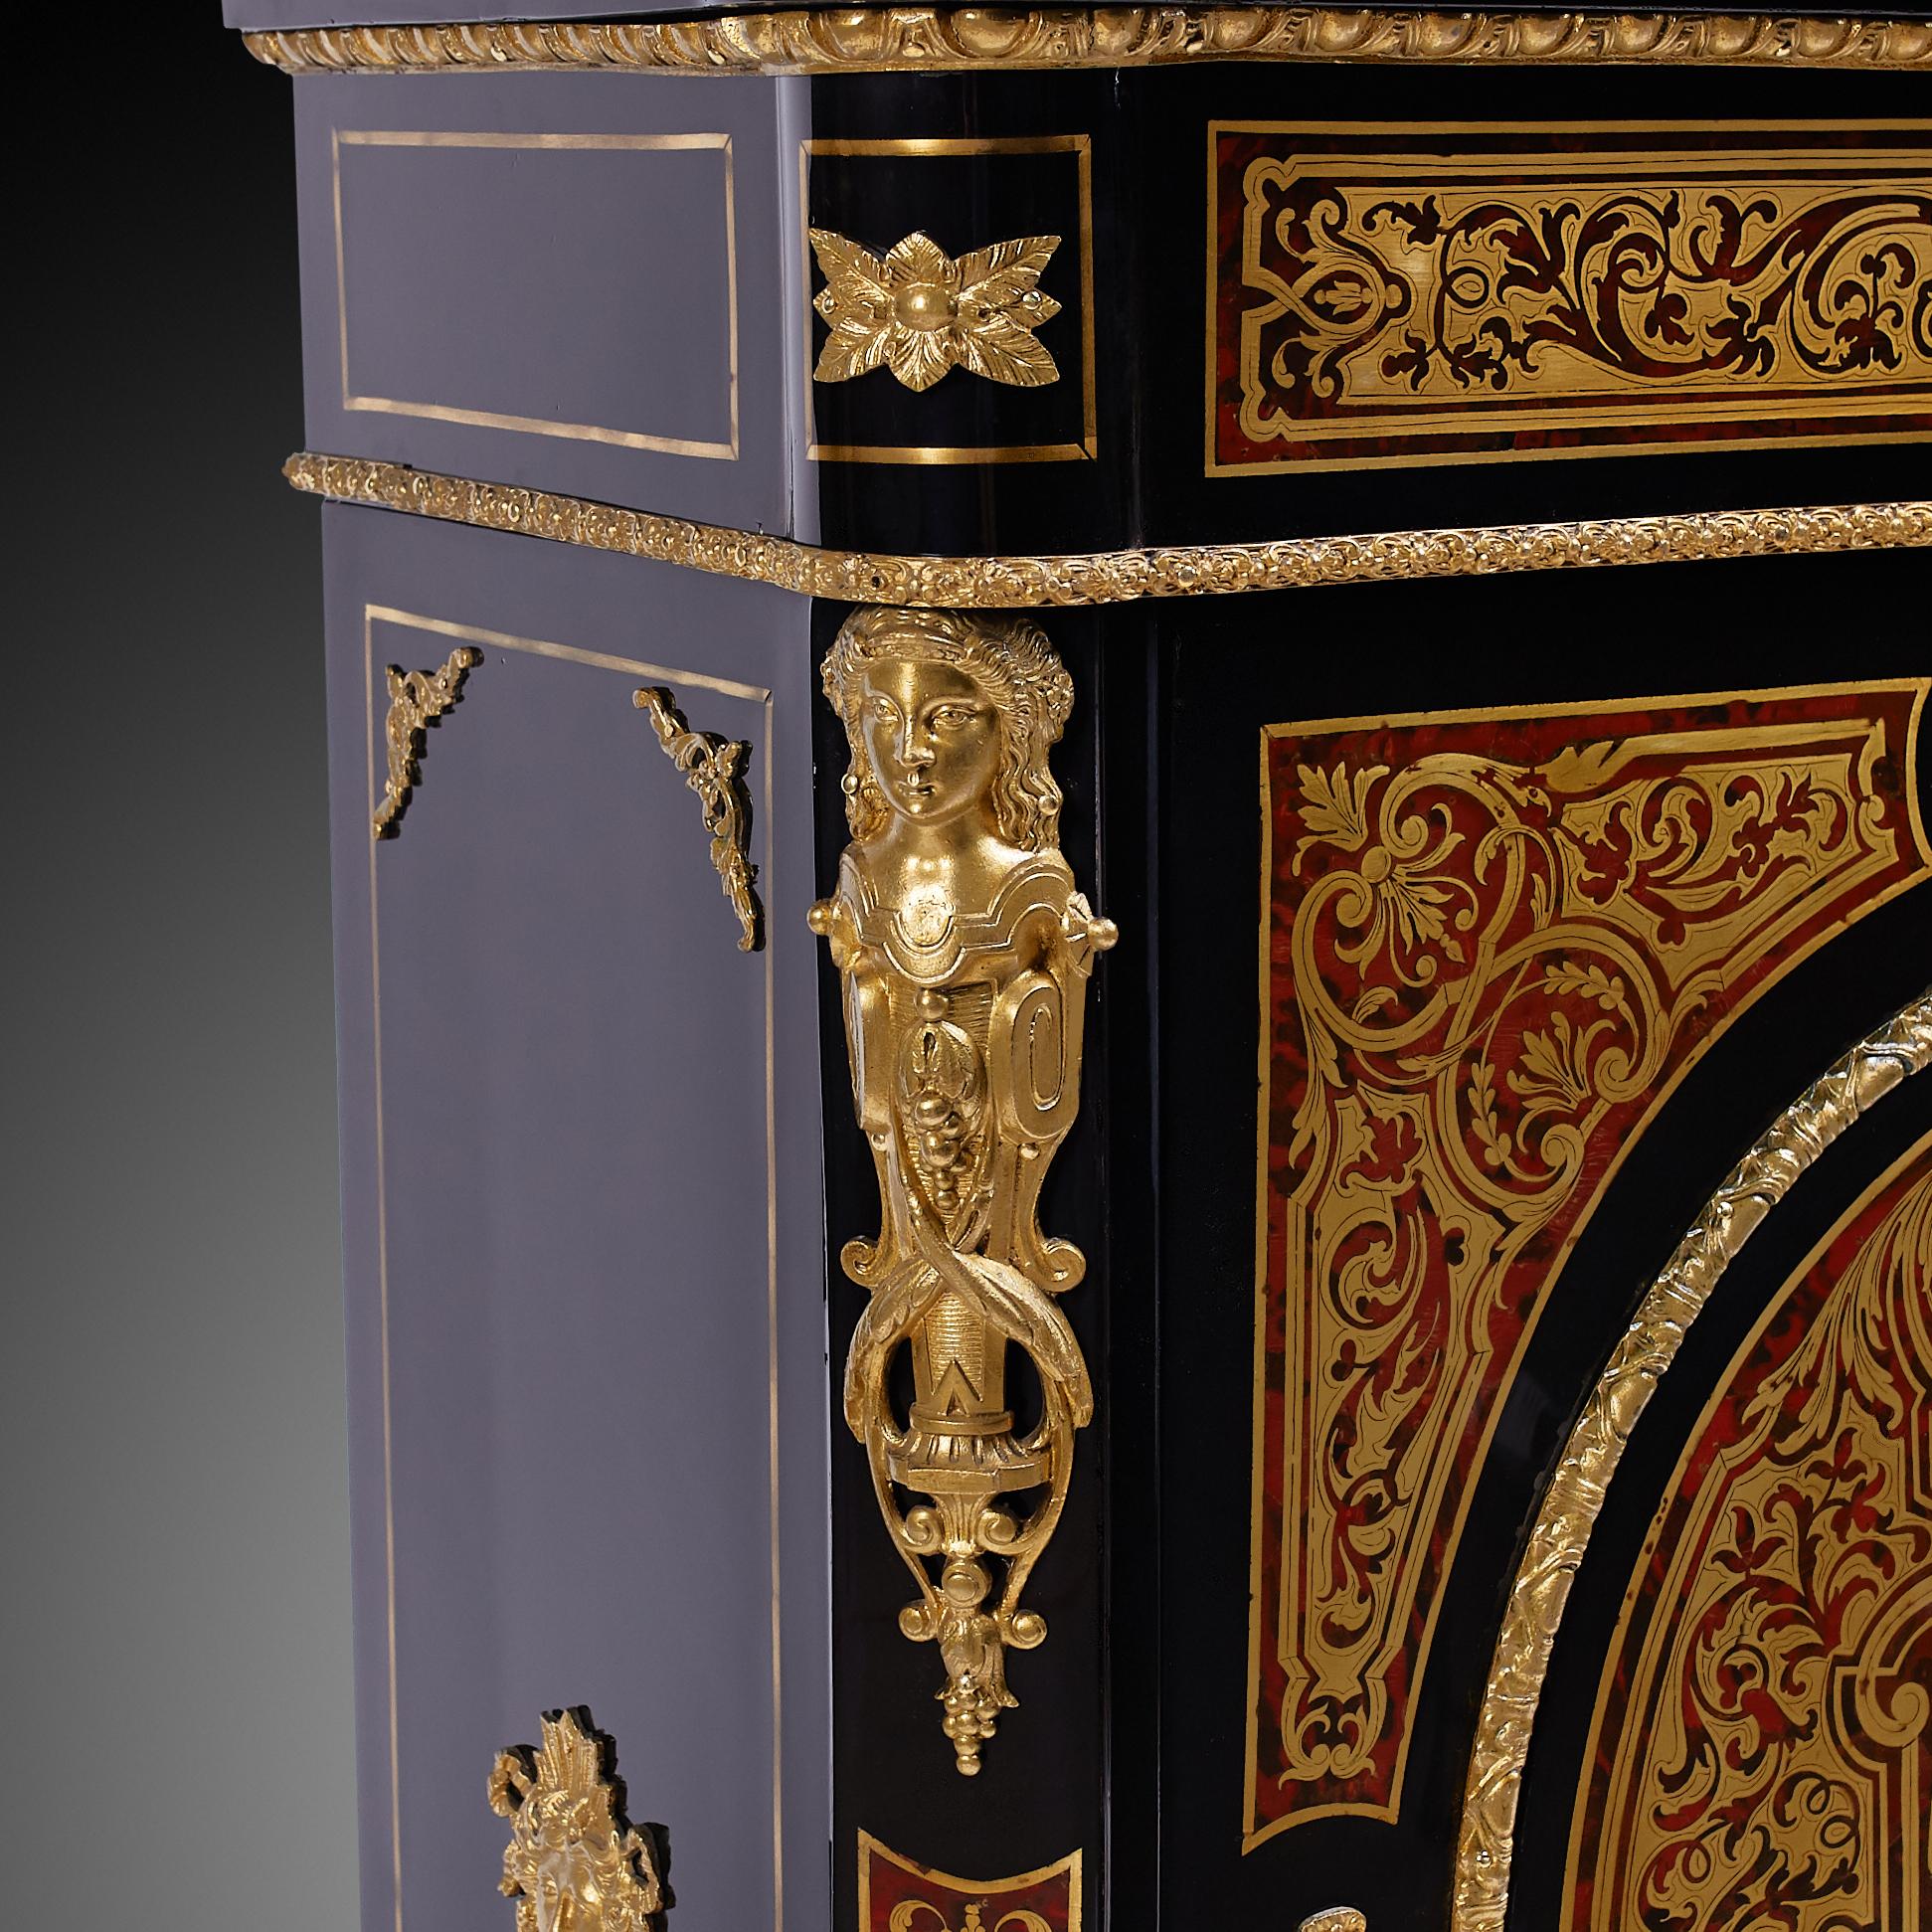 Wood Commode Style Boulle of French 19th Century Napoleon III Period For Sale